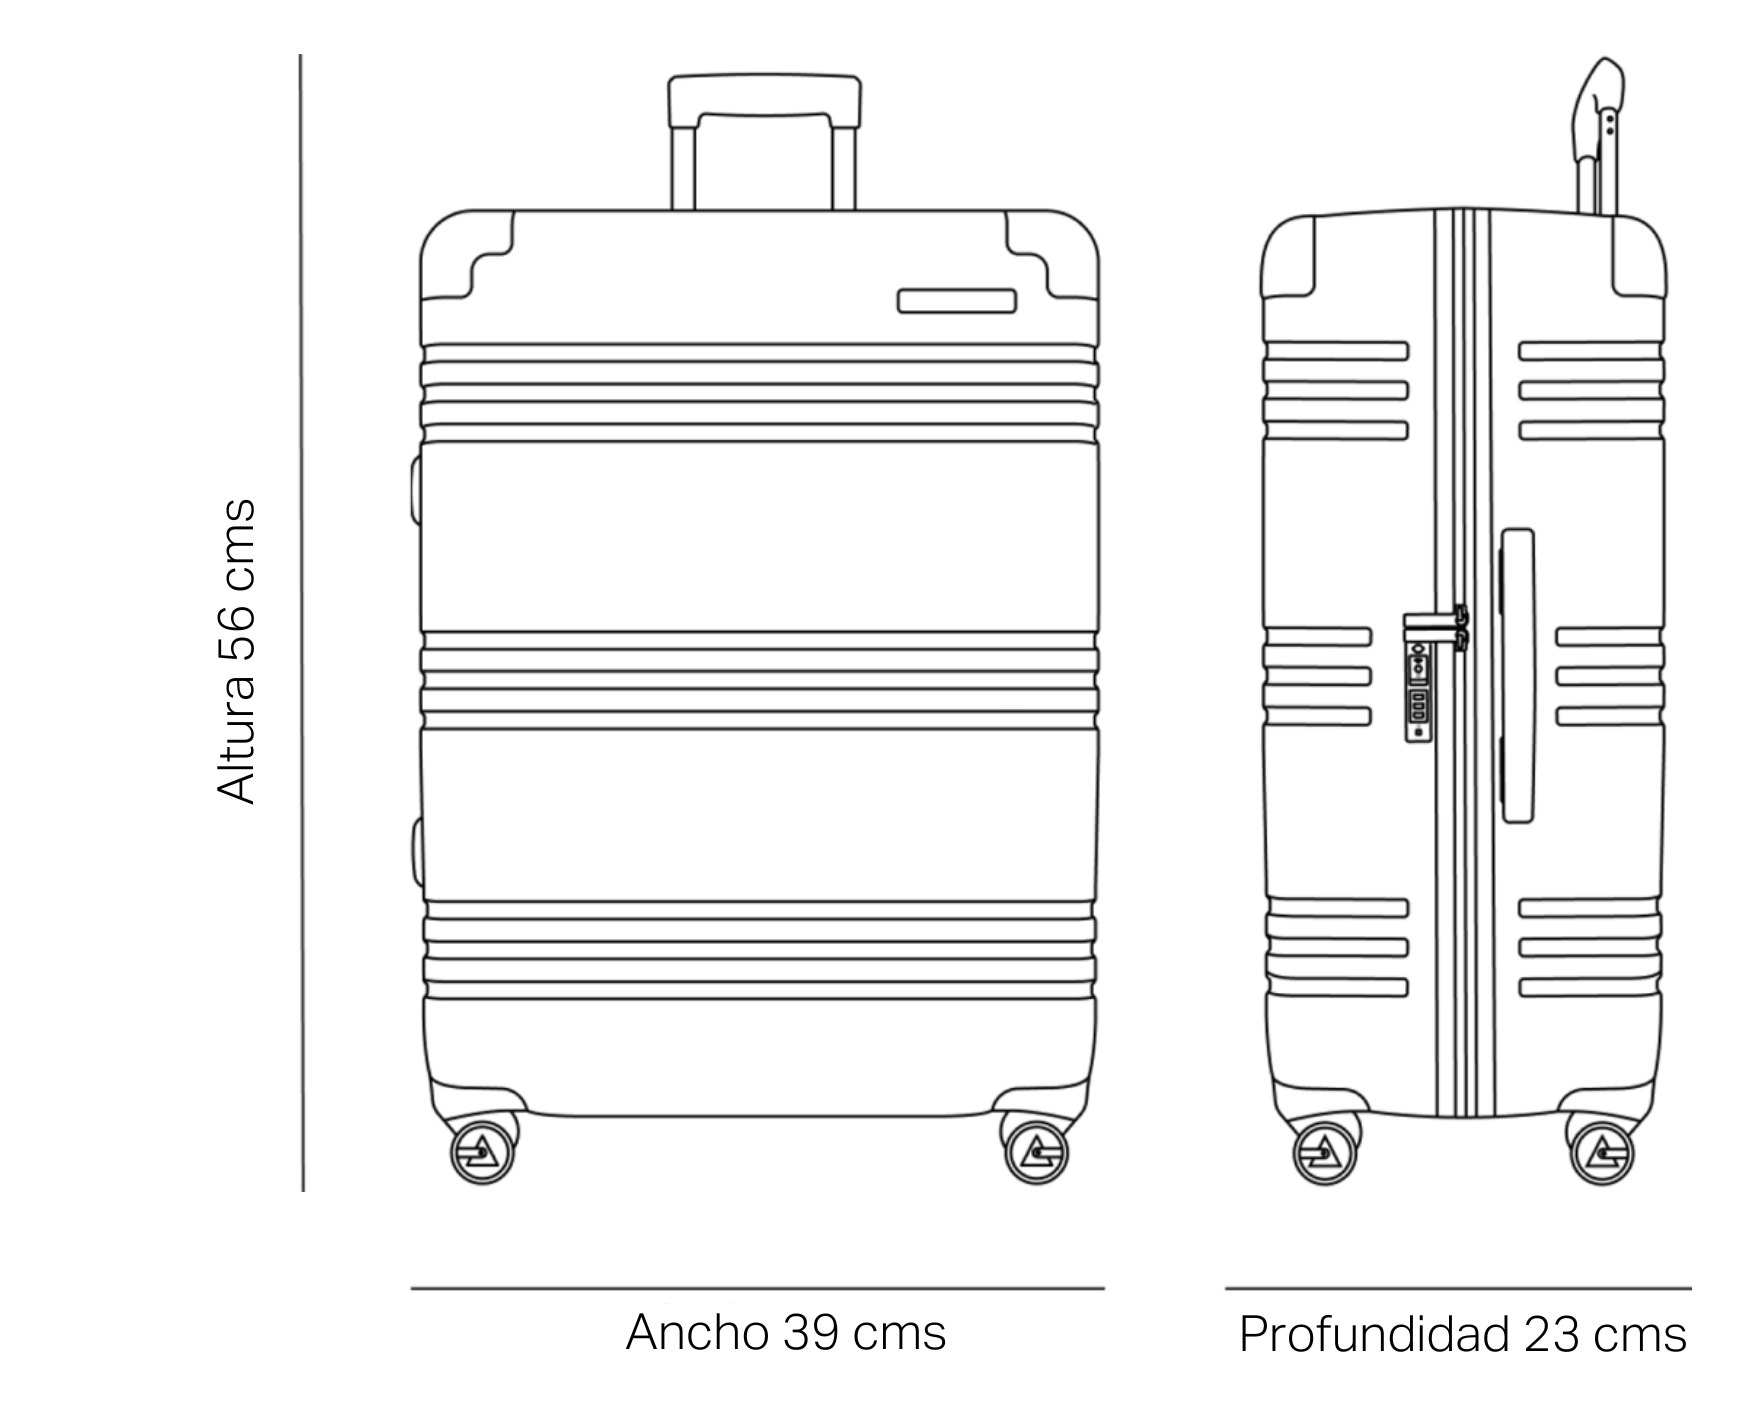 Carry—On Suitcase .2